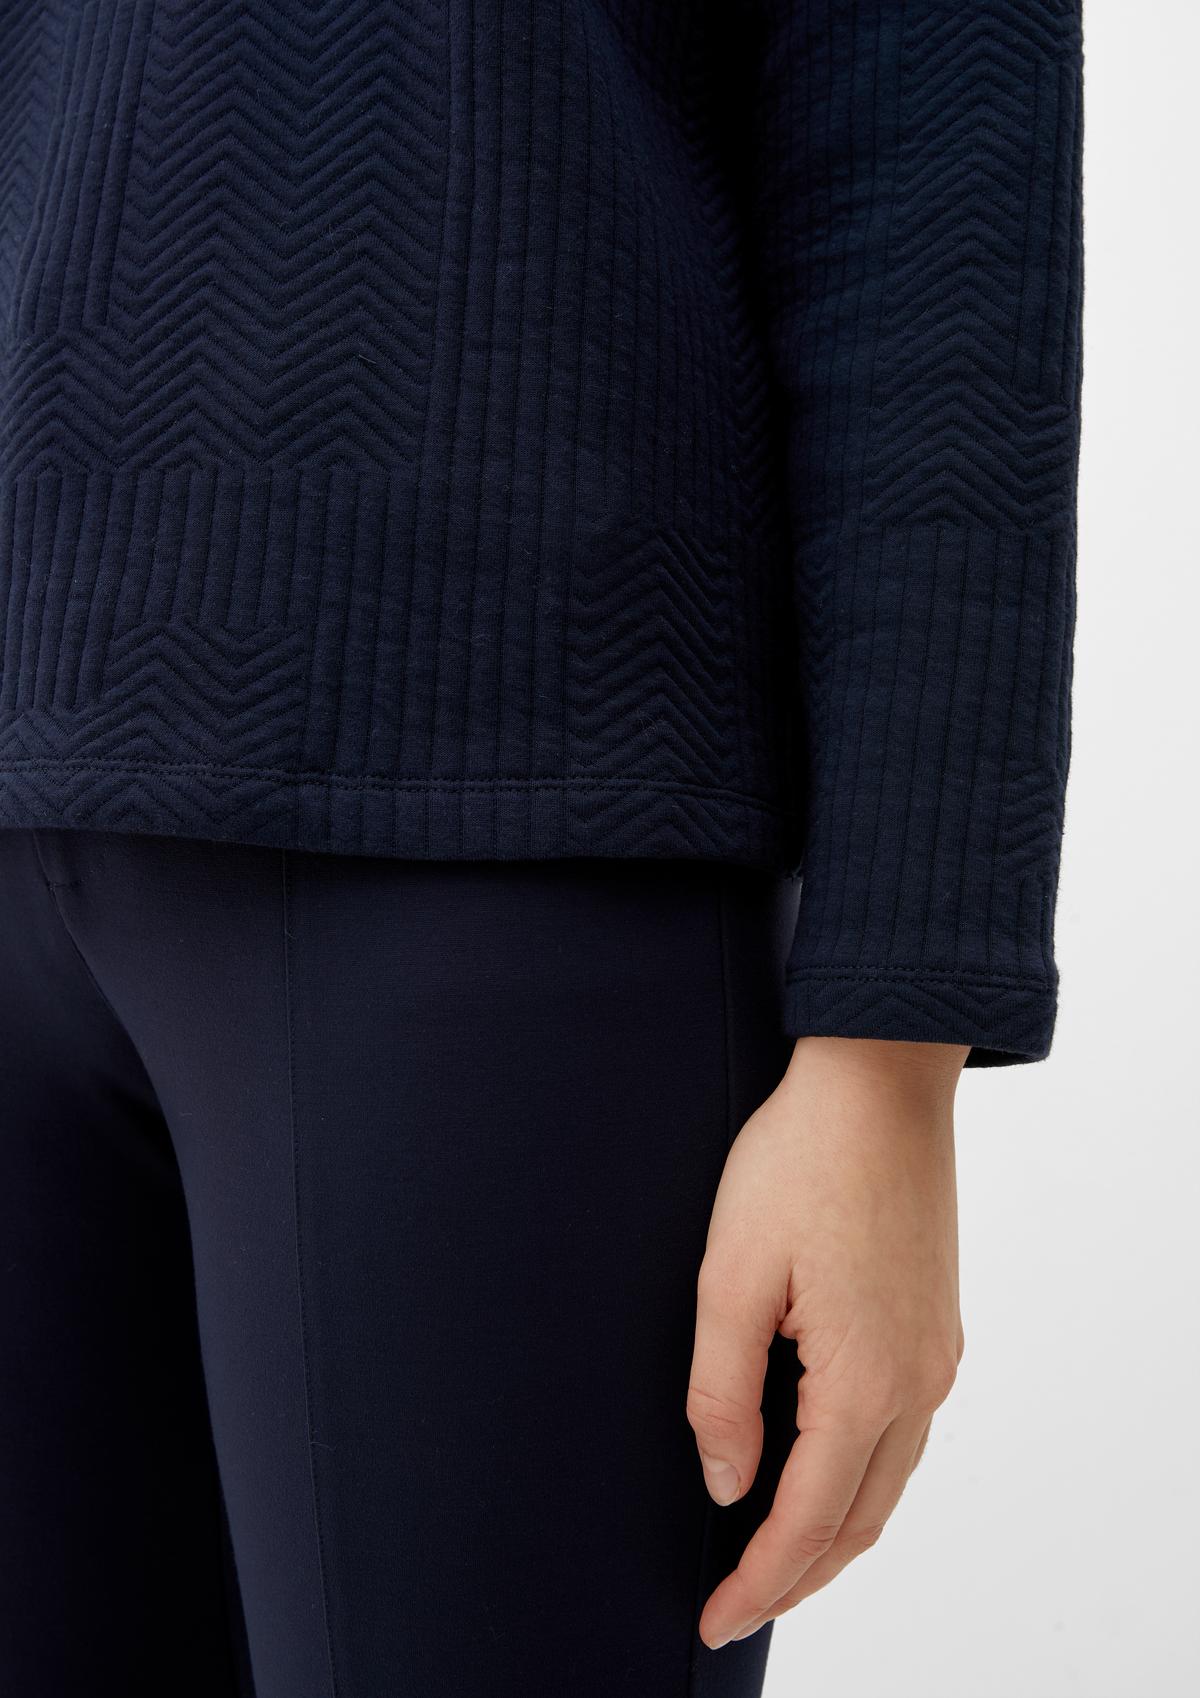 s.Oliver Sweatshirt with a textured pattern